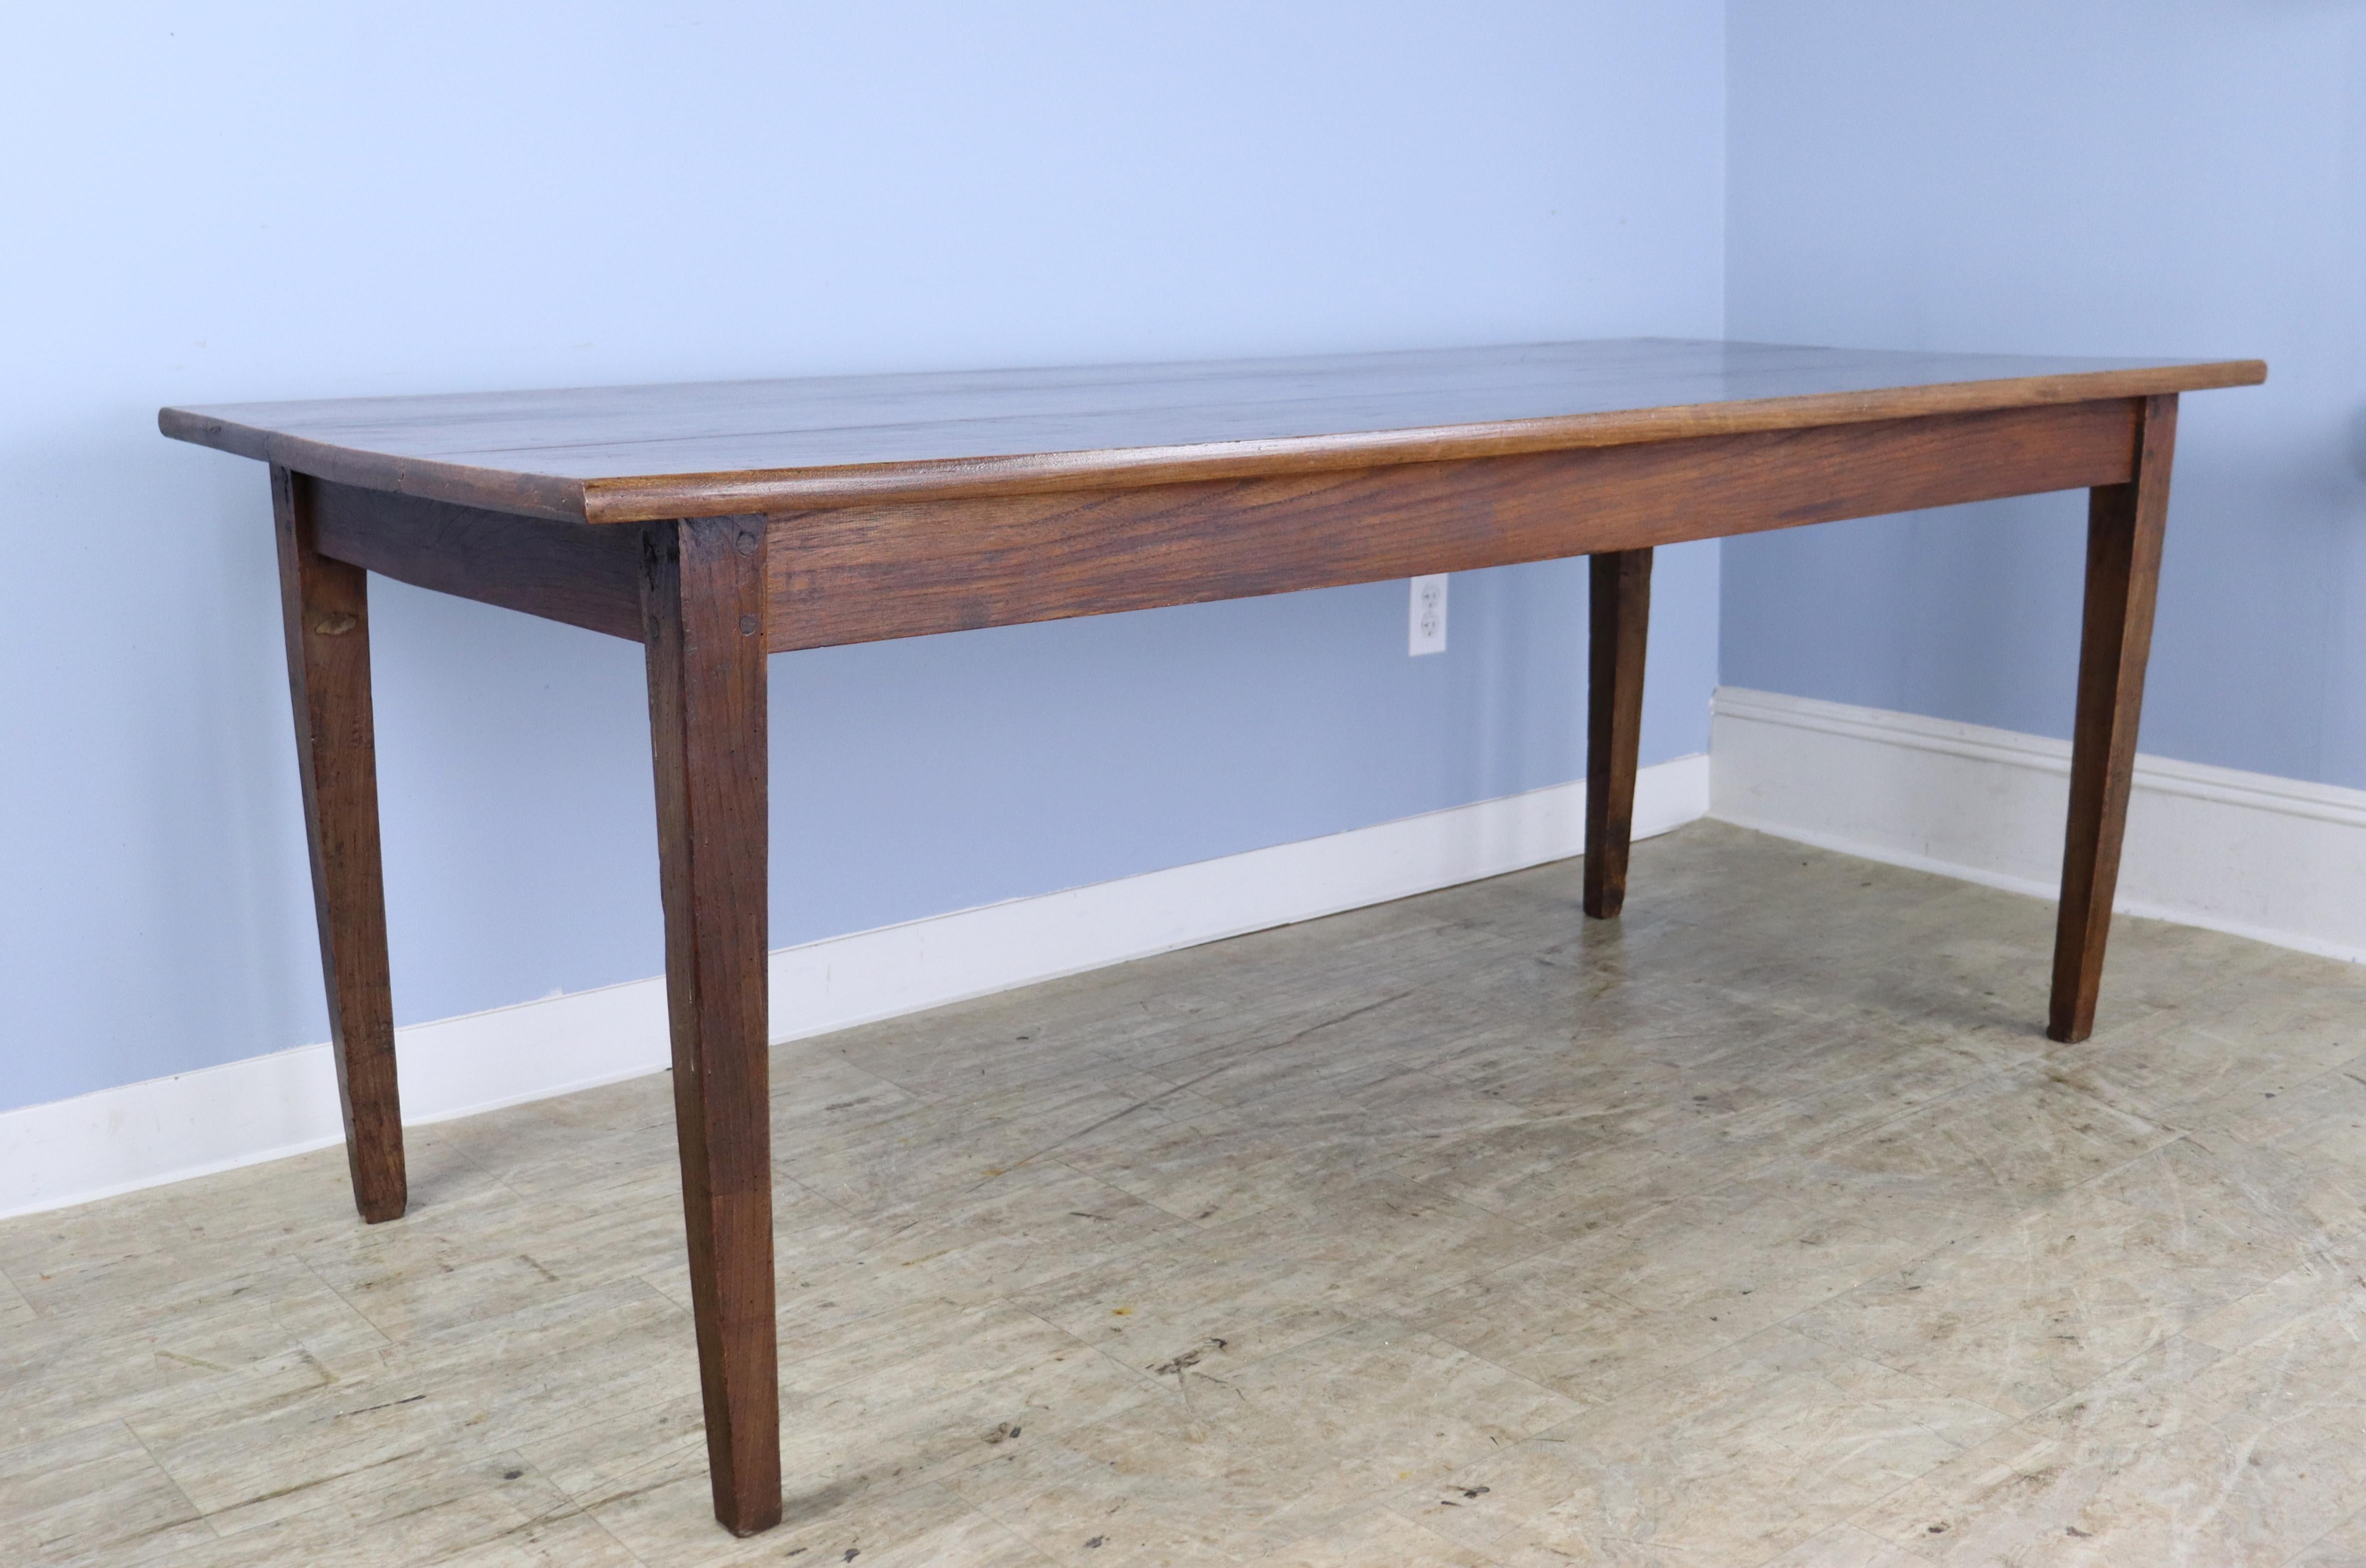 A simple elegant elm dining or farm table with wonderful elm grain and color.  The top is is in nice condition very little marks and wear.  The apron height of 24.5 inches is good for knees and there are 64.5 inches between the legs on the long side.